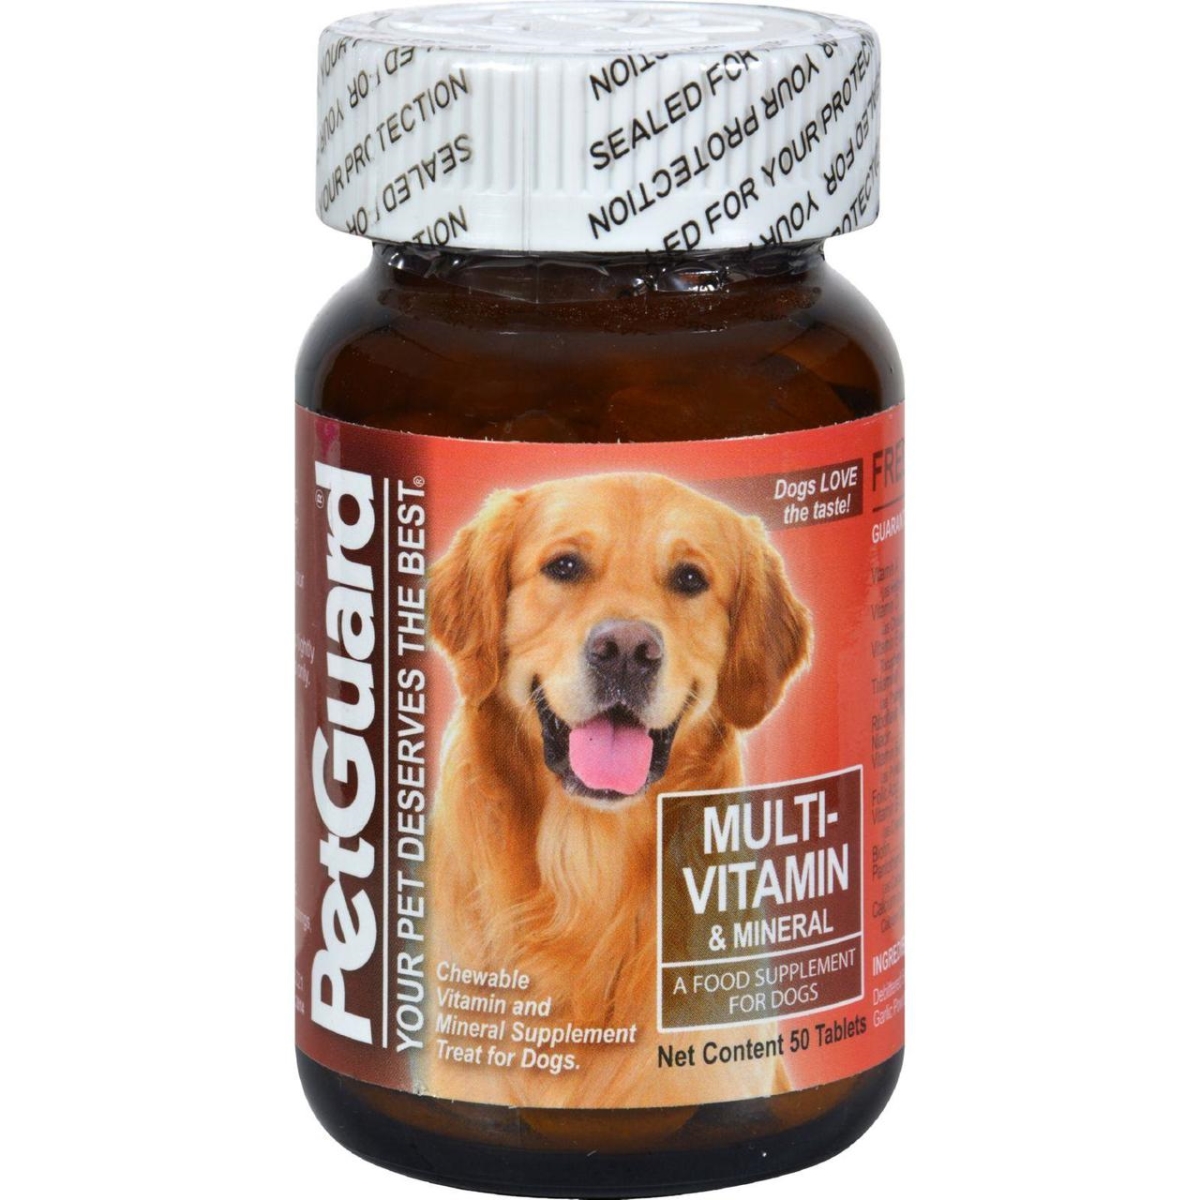 Petguard Hg0709709 Multi-vitamin & Mineral For Dogs, 50 Tablets